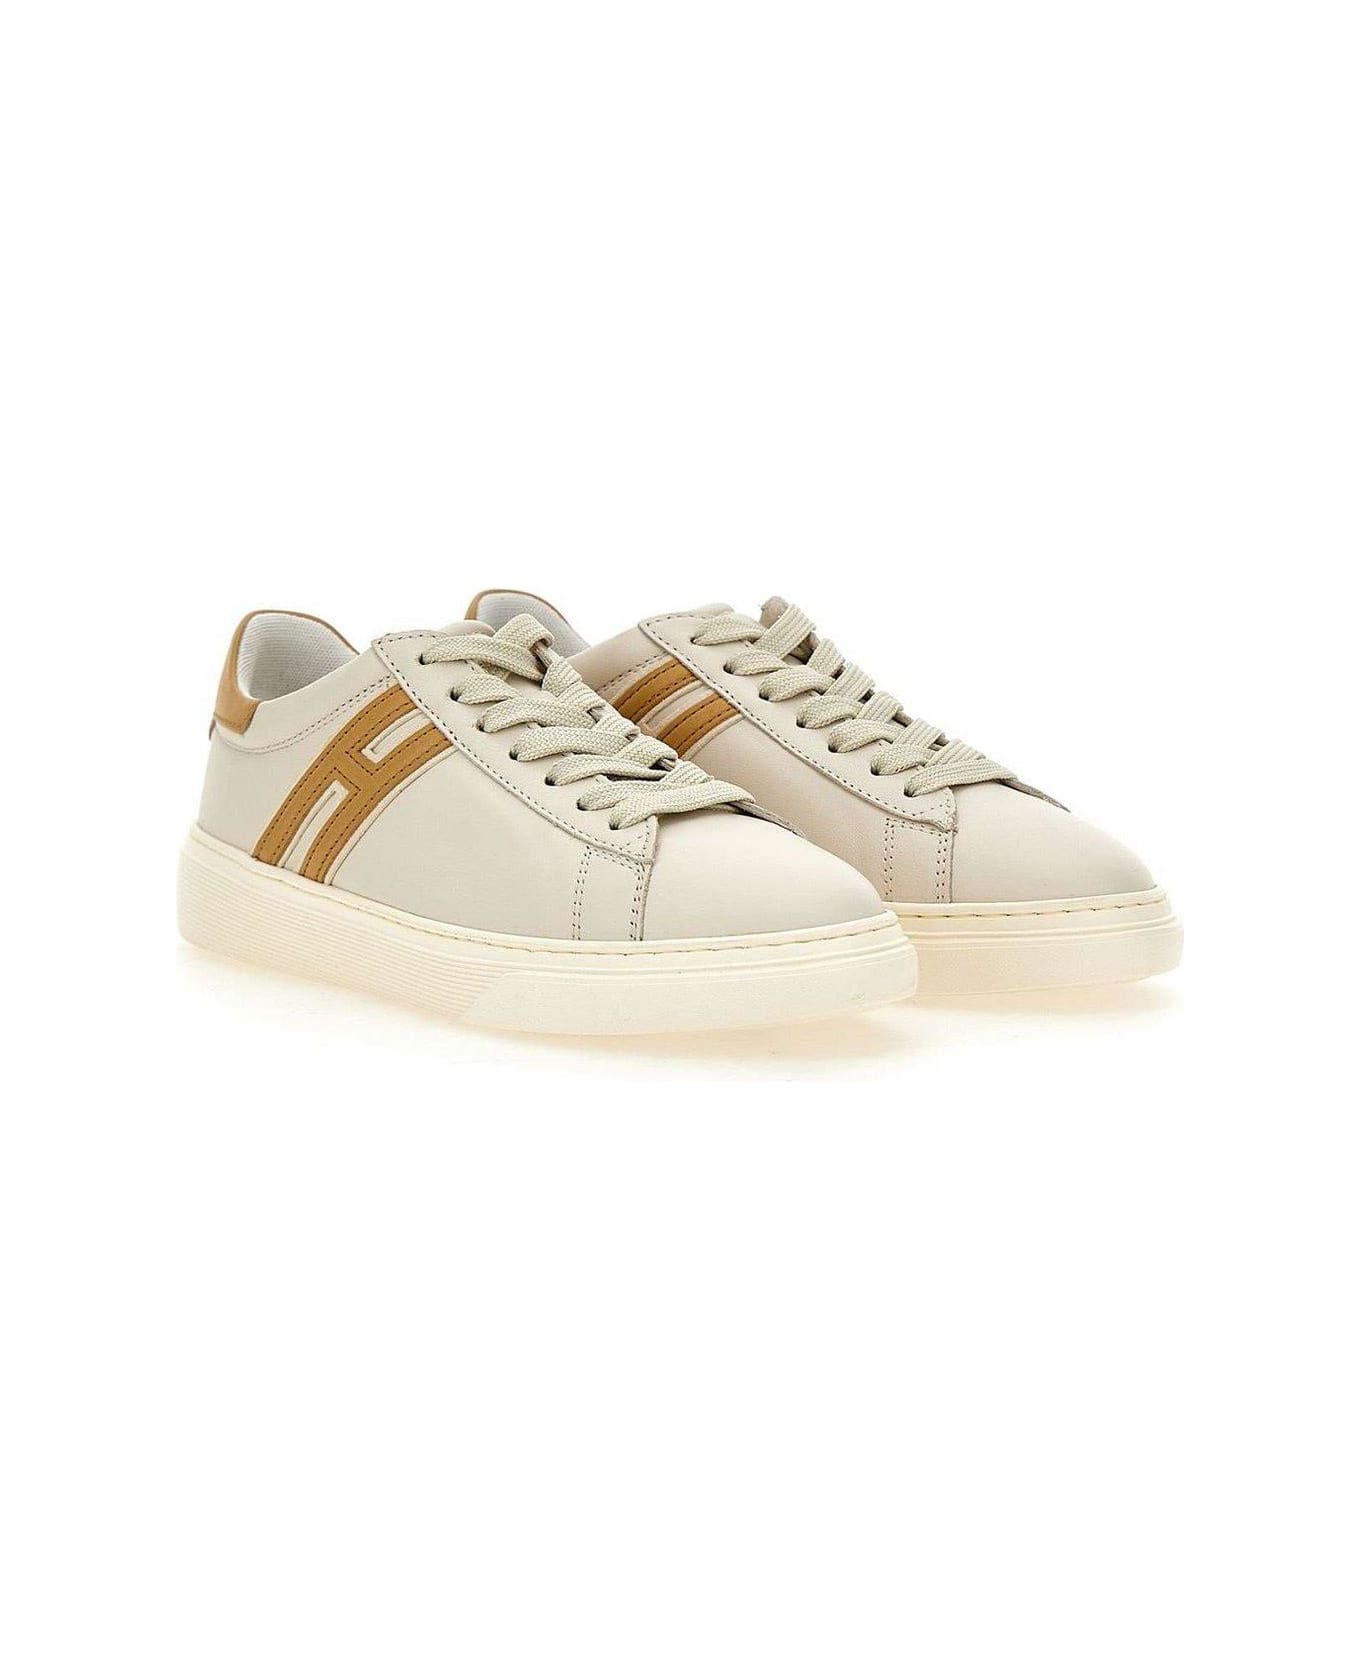 Hogan Sneakers "h365" Made Of Leather - WHITE/ Brown スニーカー